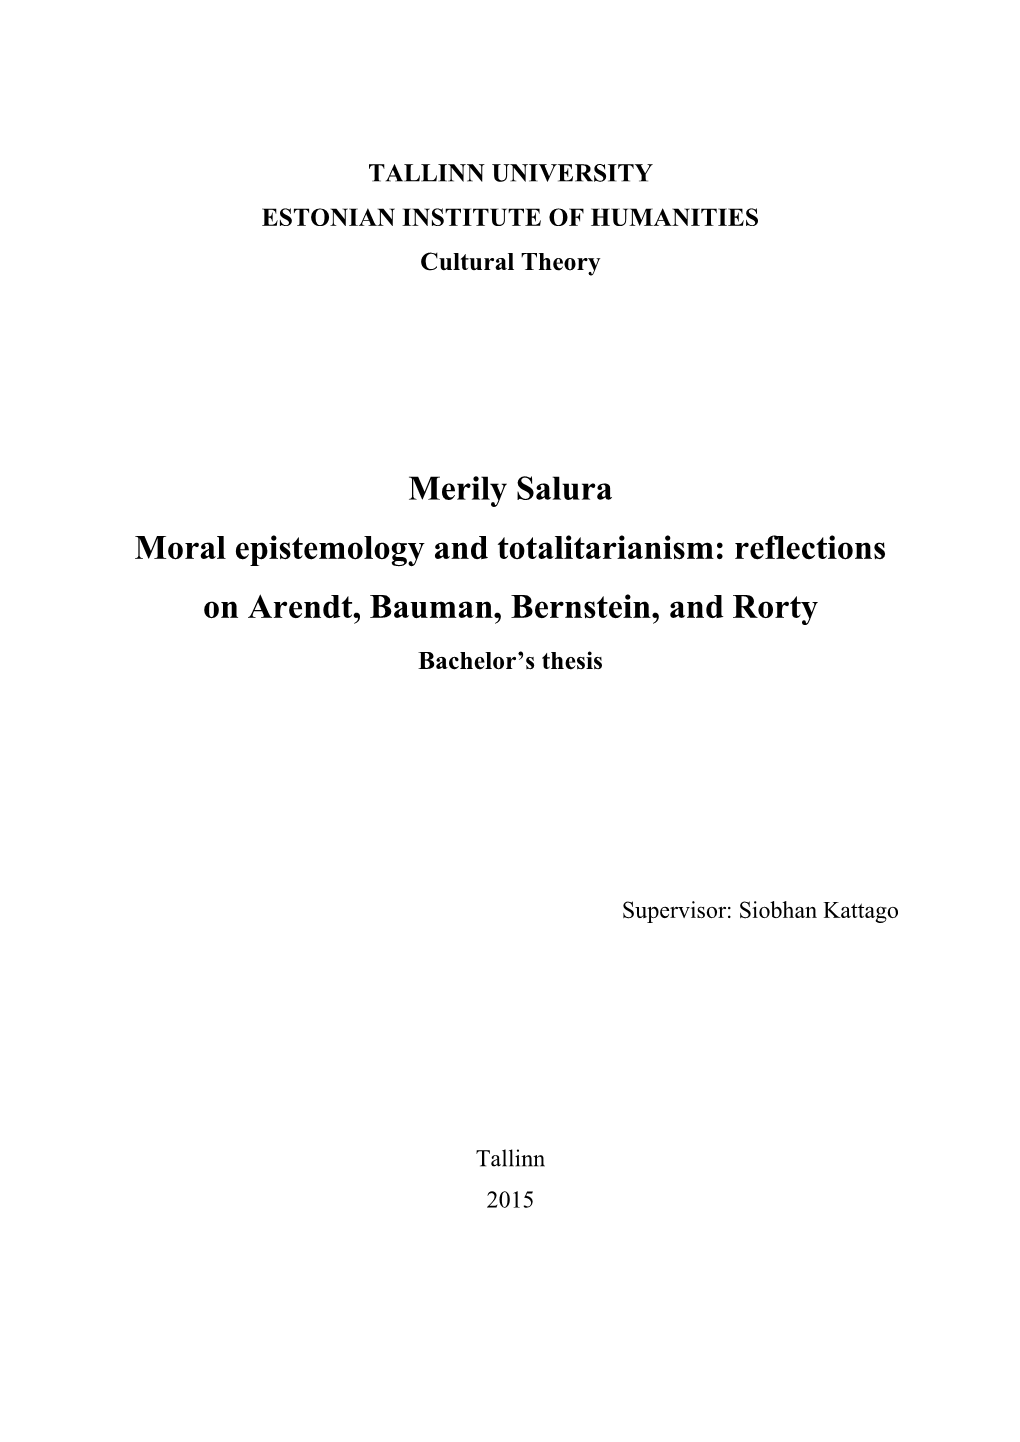 Merily Salura Moral Epistemology and Totalitarianism: Reflections on Arendt, Bauman, Bernstein, and Rorty Bachelor’S Thesis